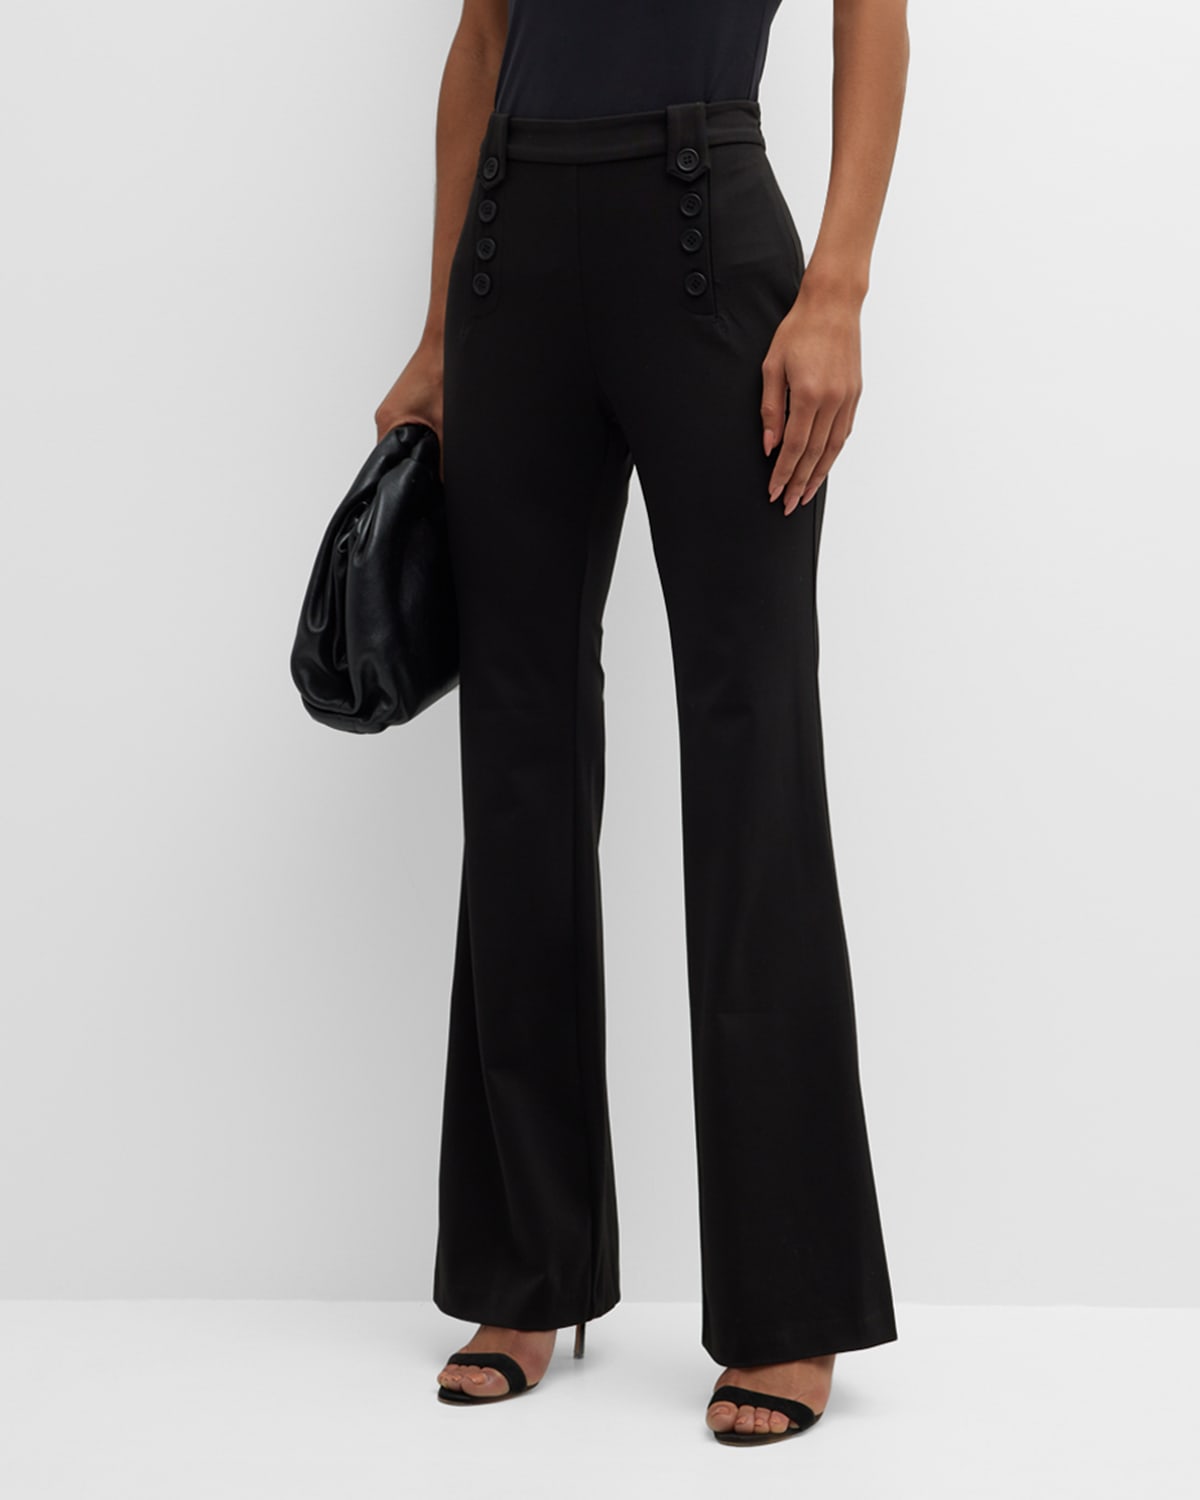 The Metis Button-Side Flare Pants